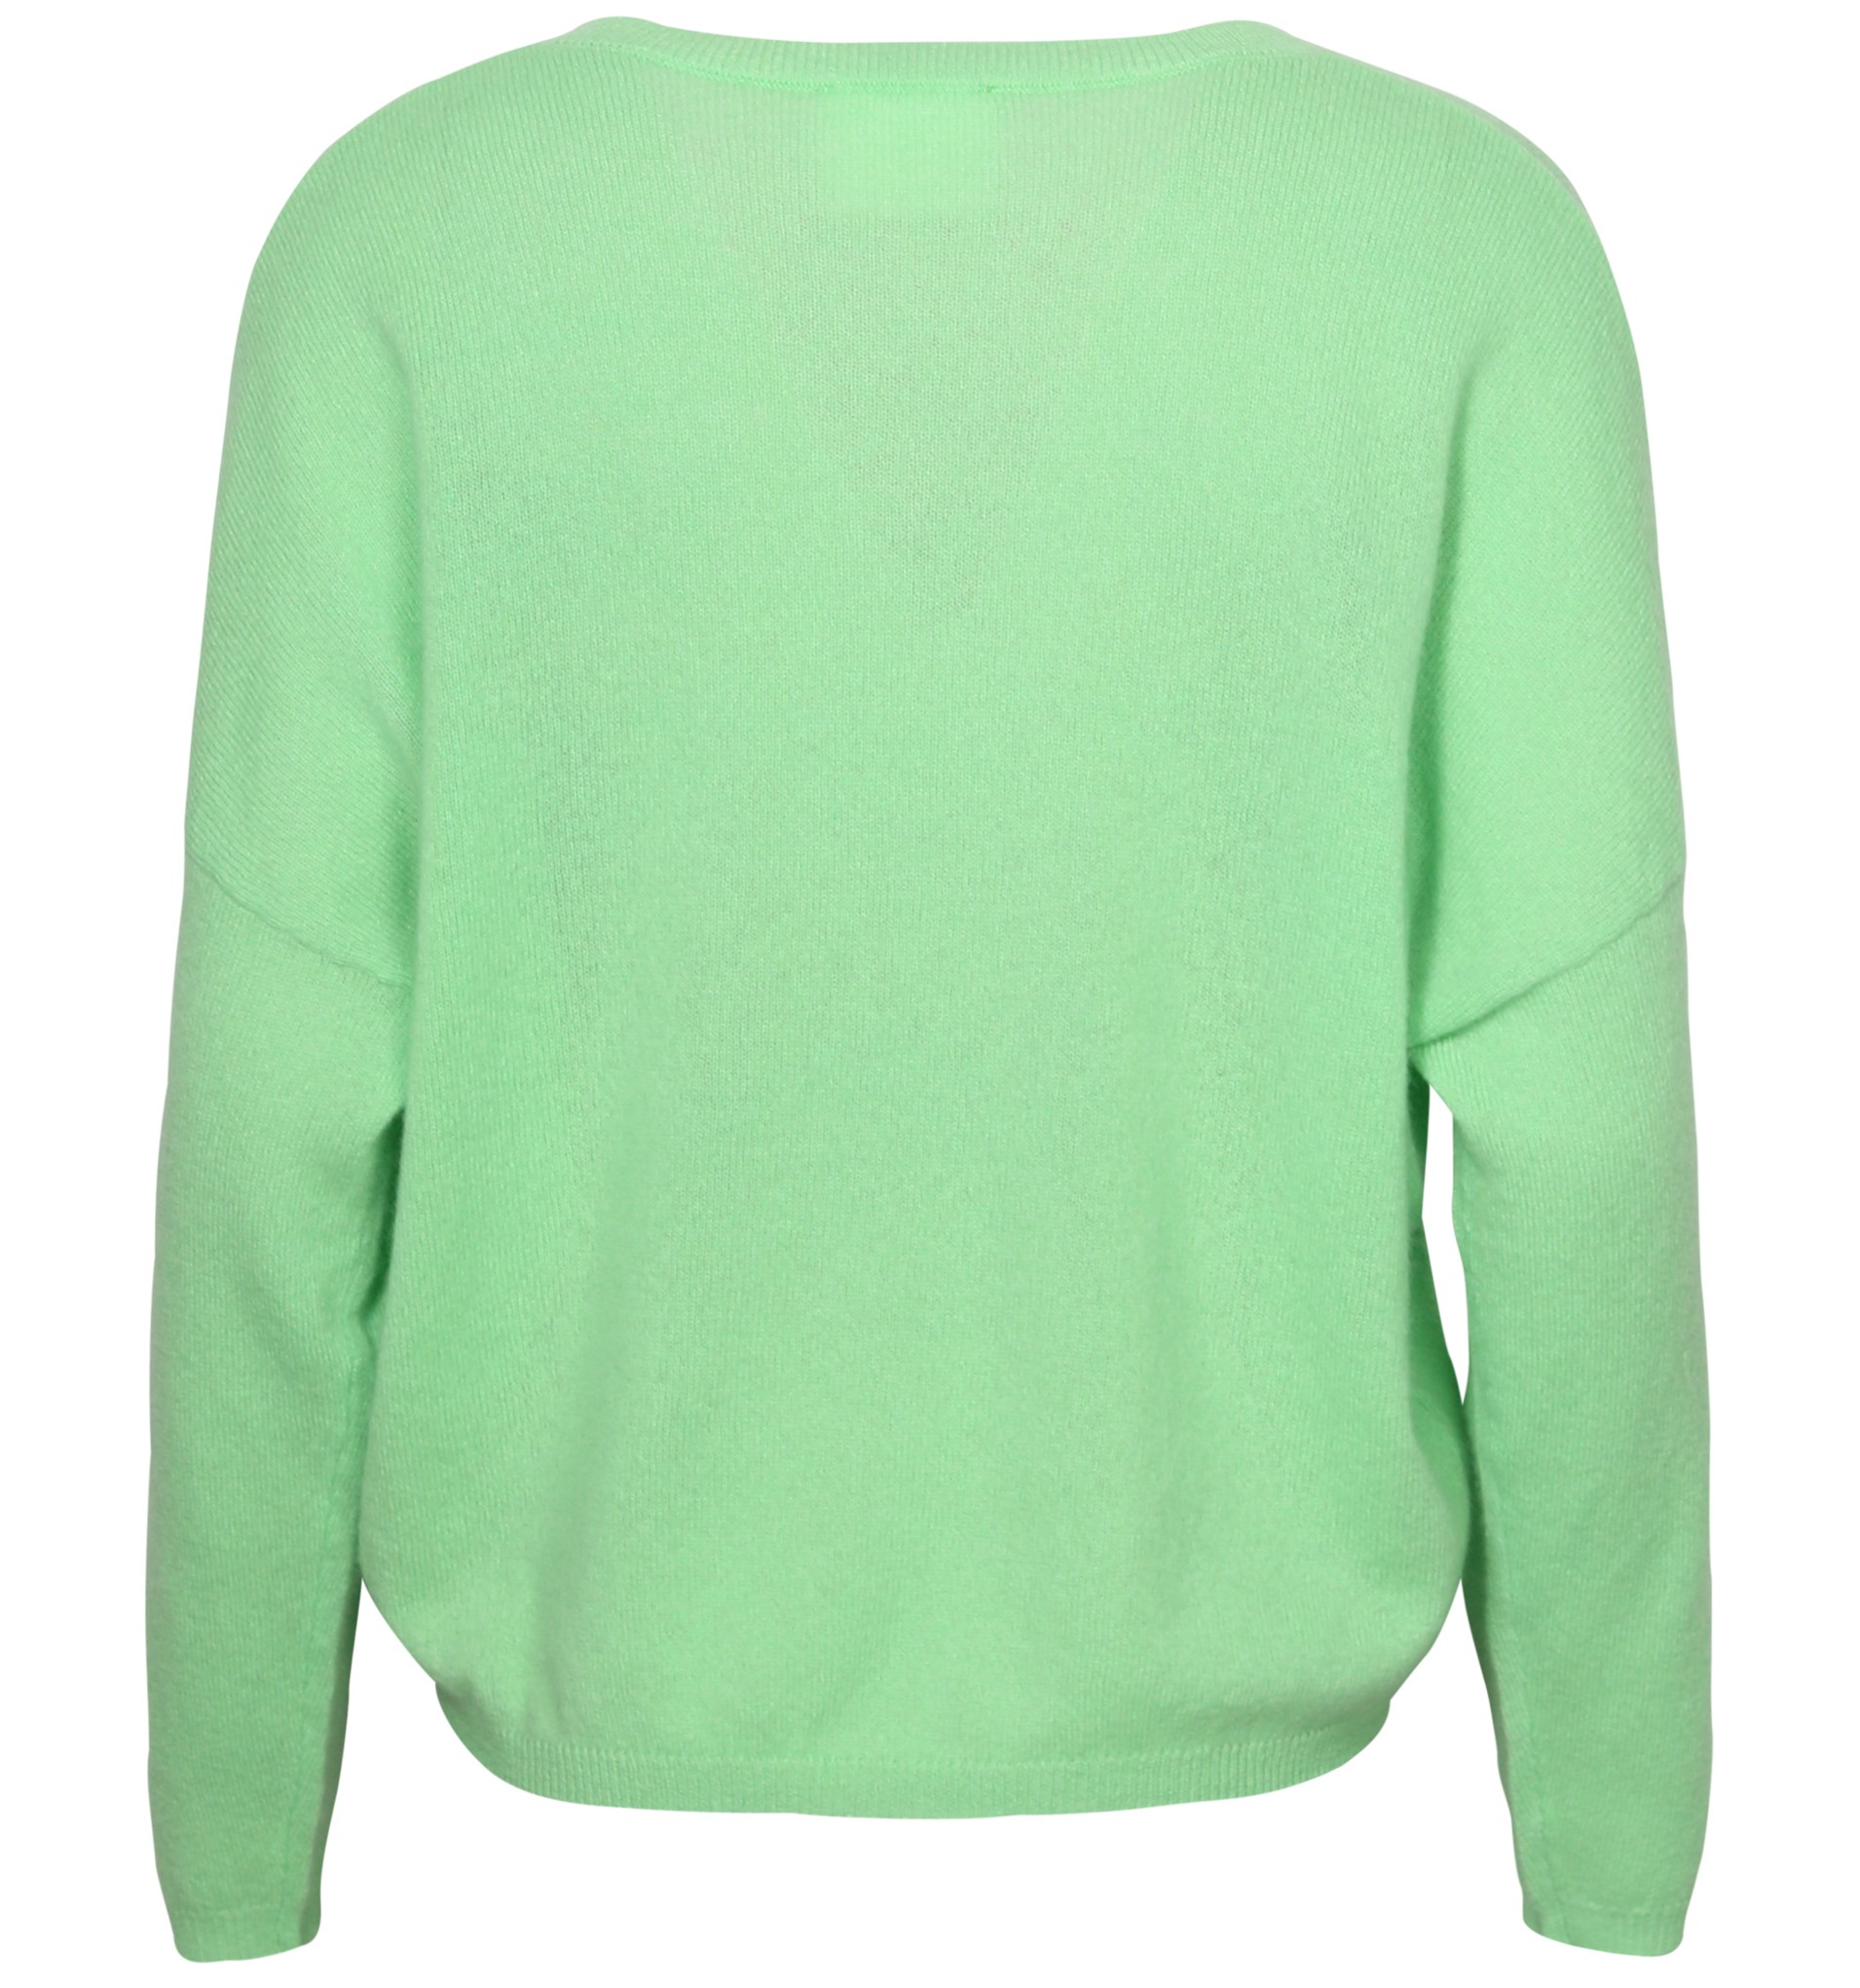 ABSOLUT CASHMERE V-Neck Sweater Alicia in Light Green L